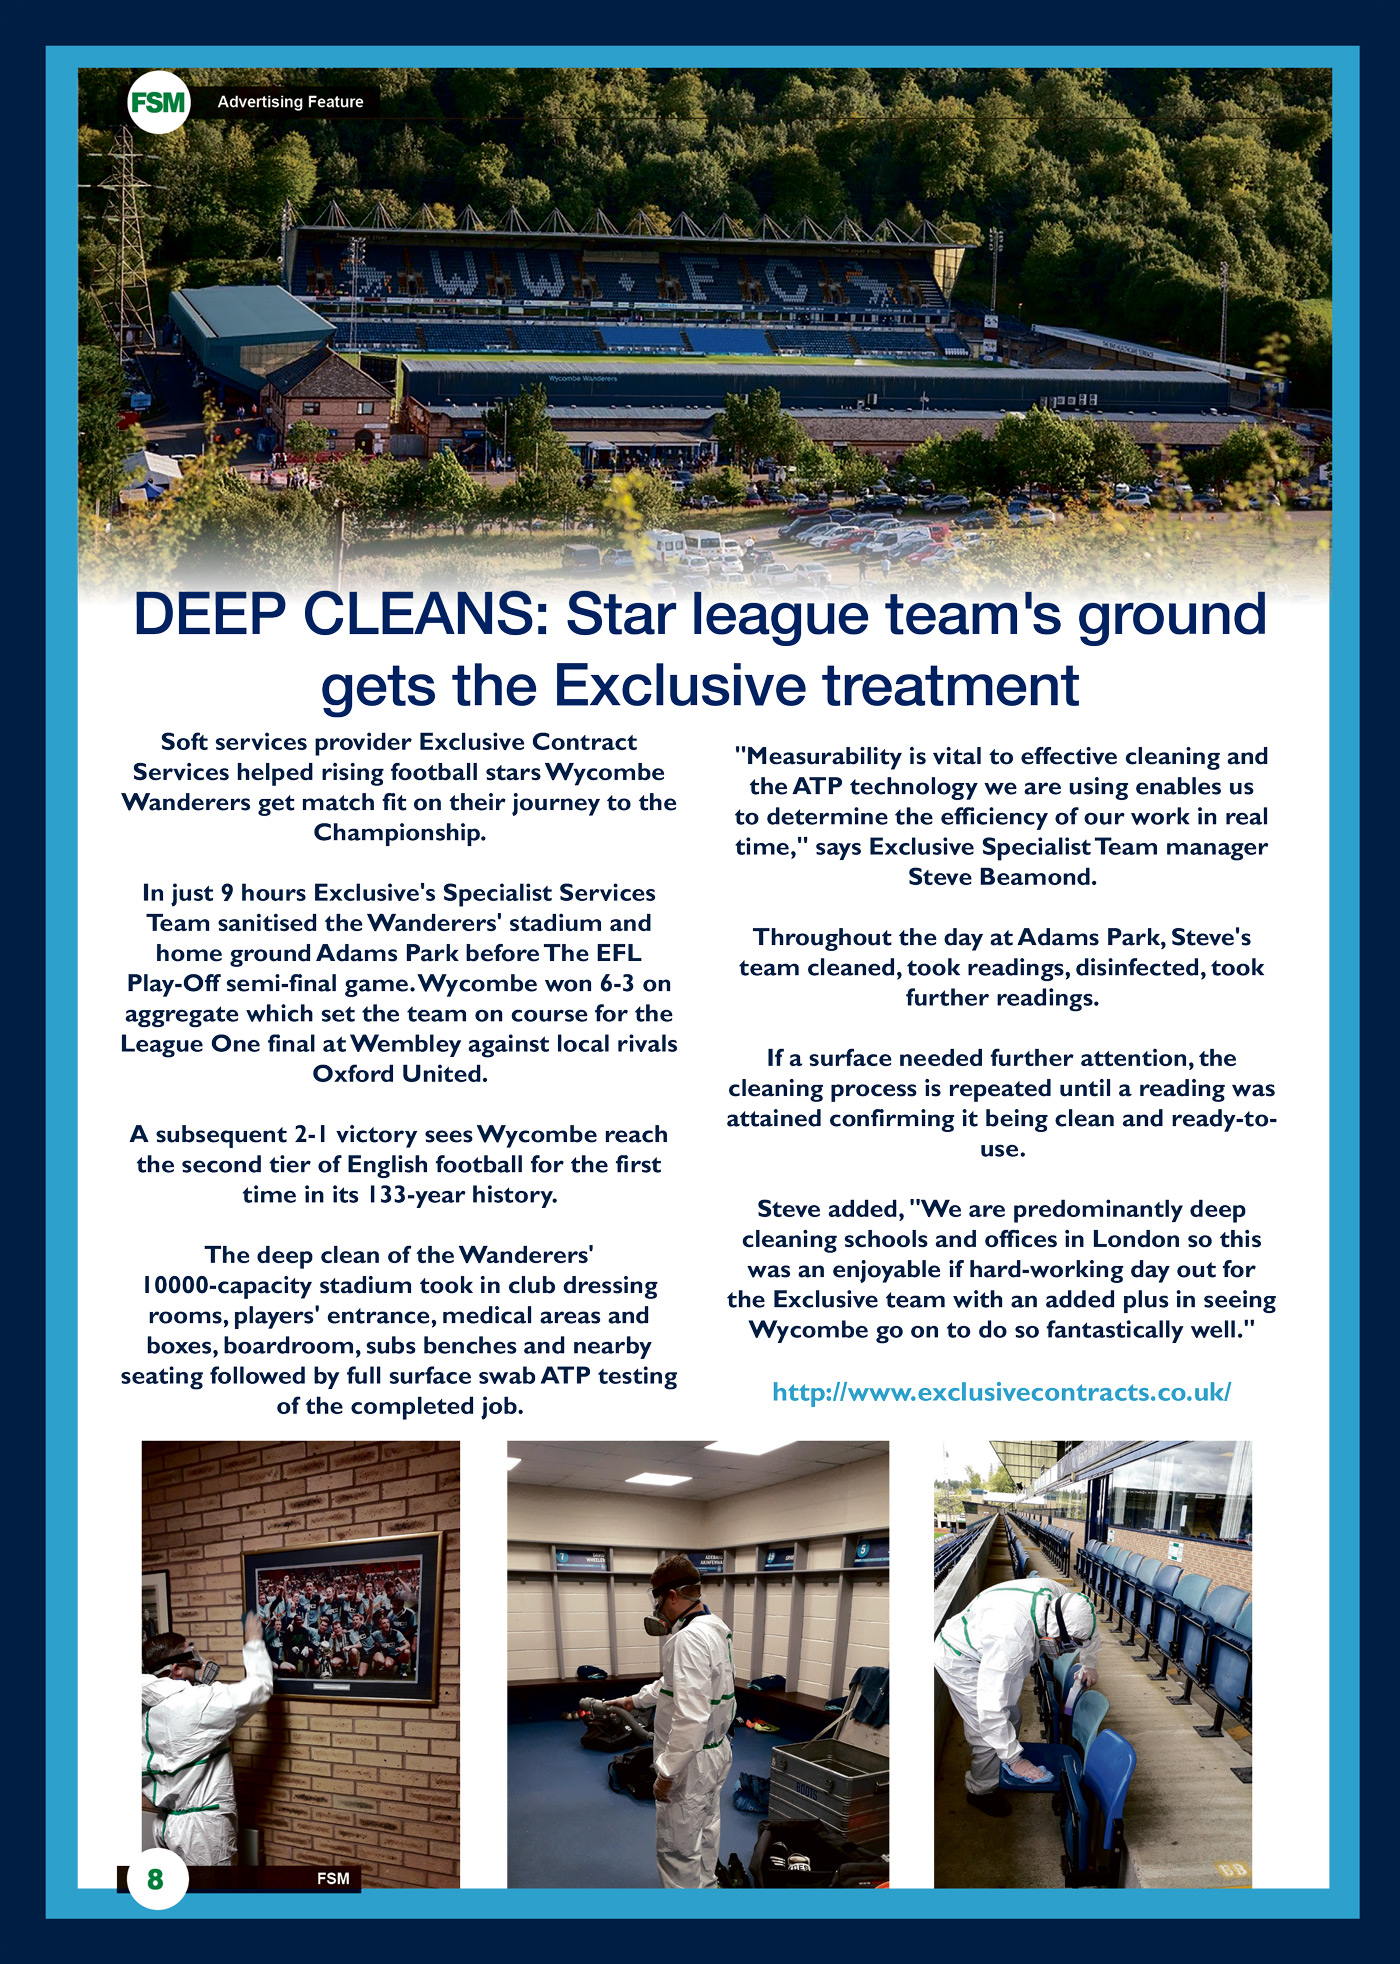 DEEP CLEANS: Star League Team's Ground Gets The Exclusive Treatment